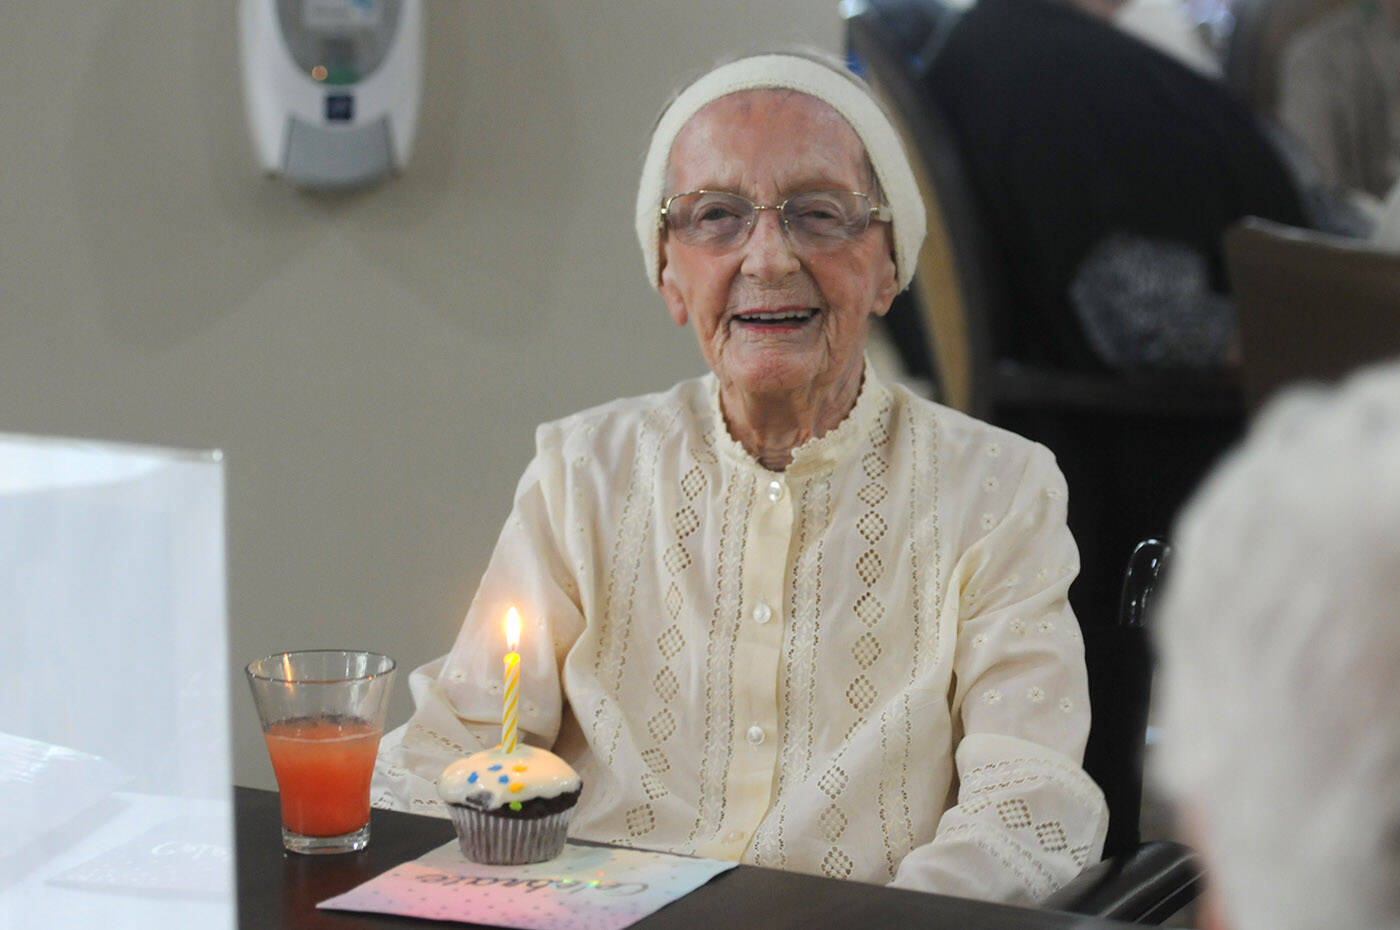 Hedy Sutulov celebrates her 108th birthday with her friends on Aug. 10, 2022 at Chartwell Birchwood Retirement Residence where she lives. She turned 108 on Aug. 18, 2022. (Jenna Hauck/ Chilliwack Progress)